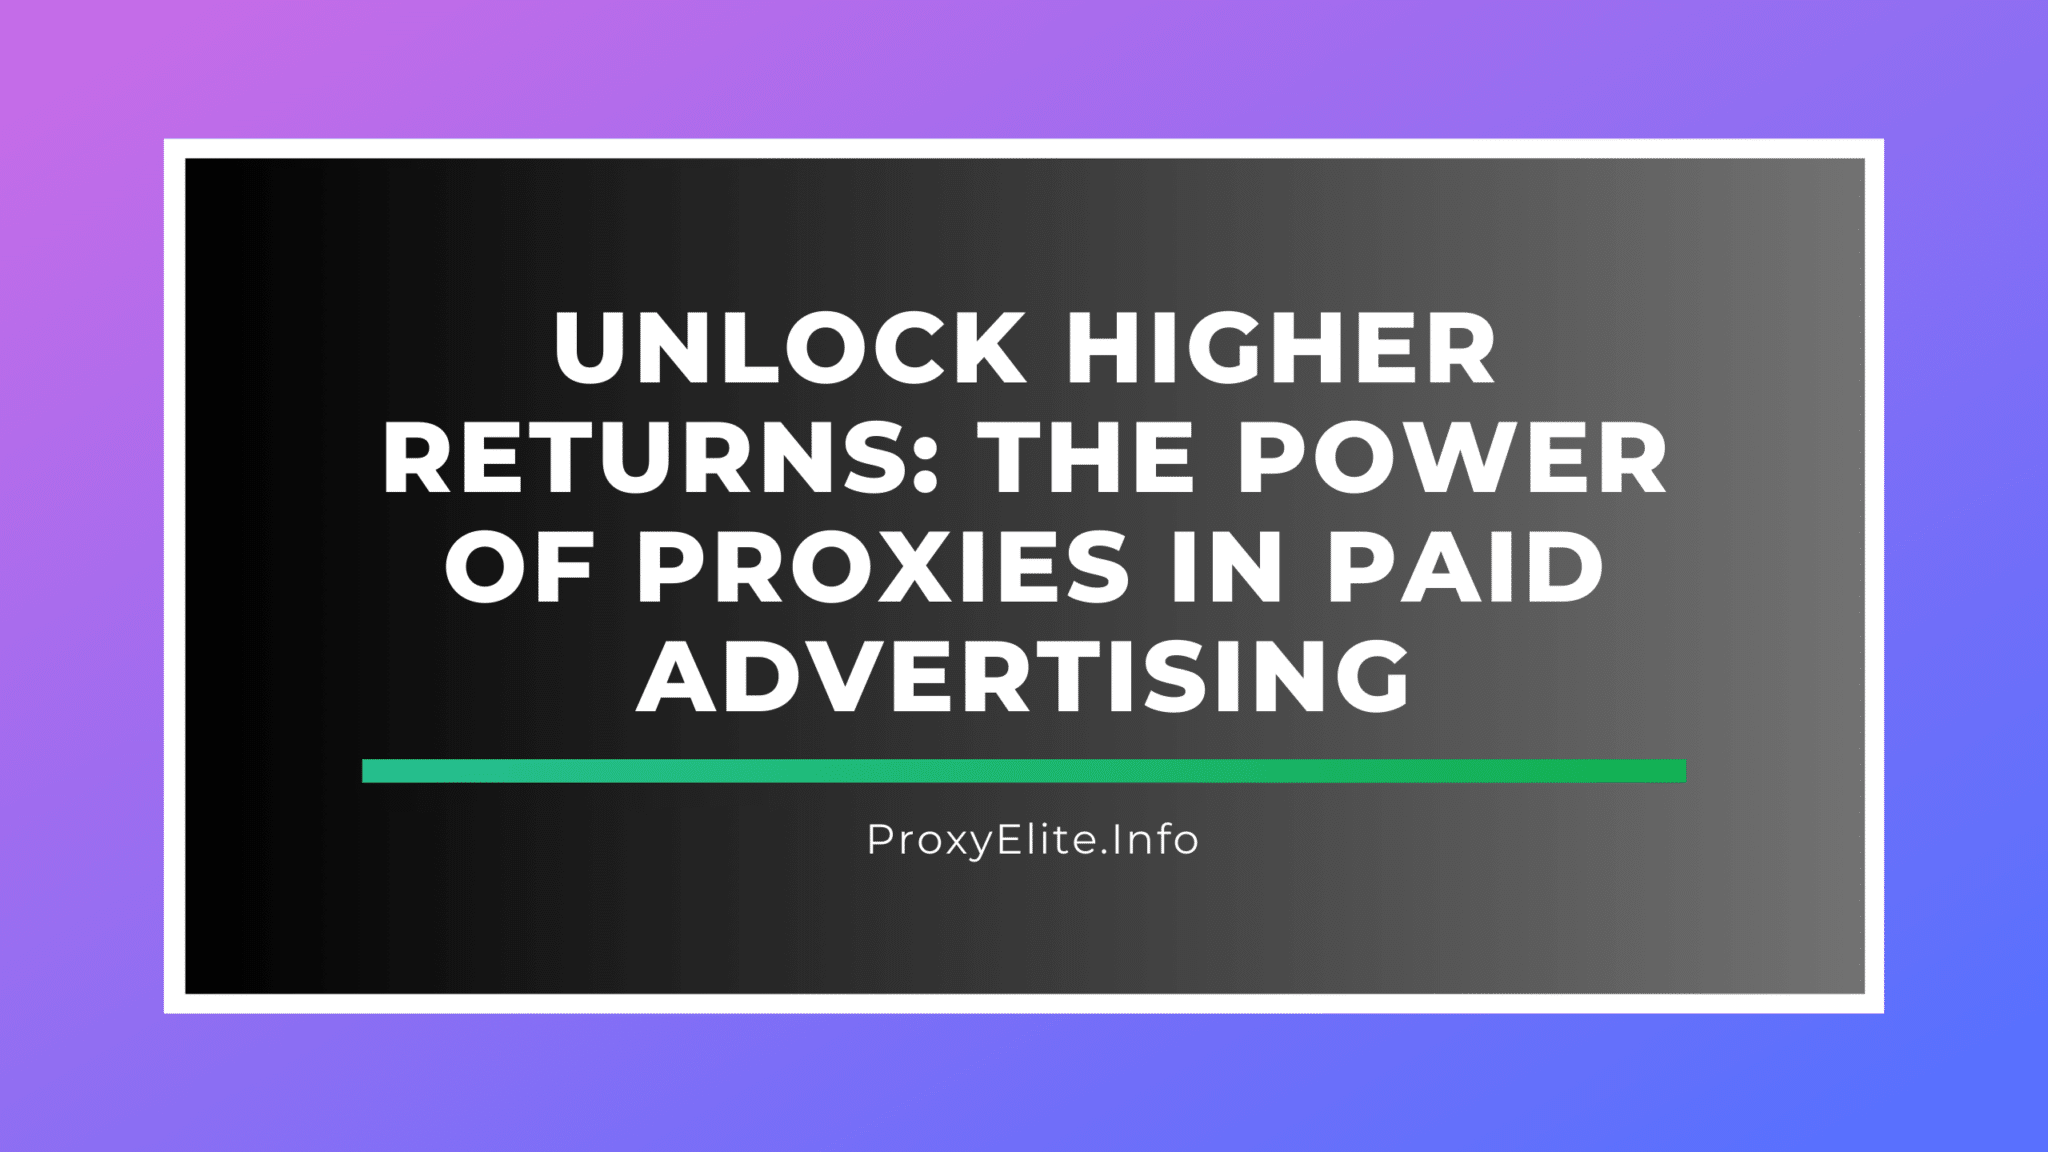 Unlock Higher Returns: The Power of Proxies in Paid Advertising